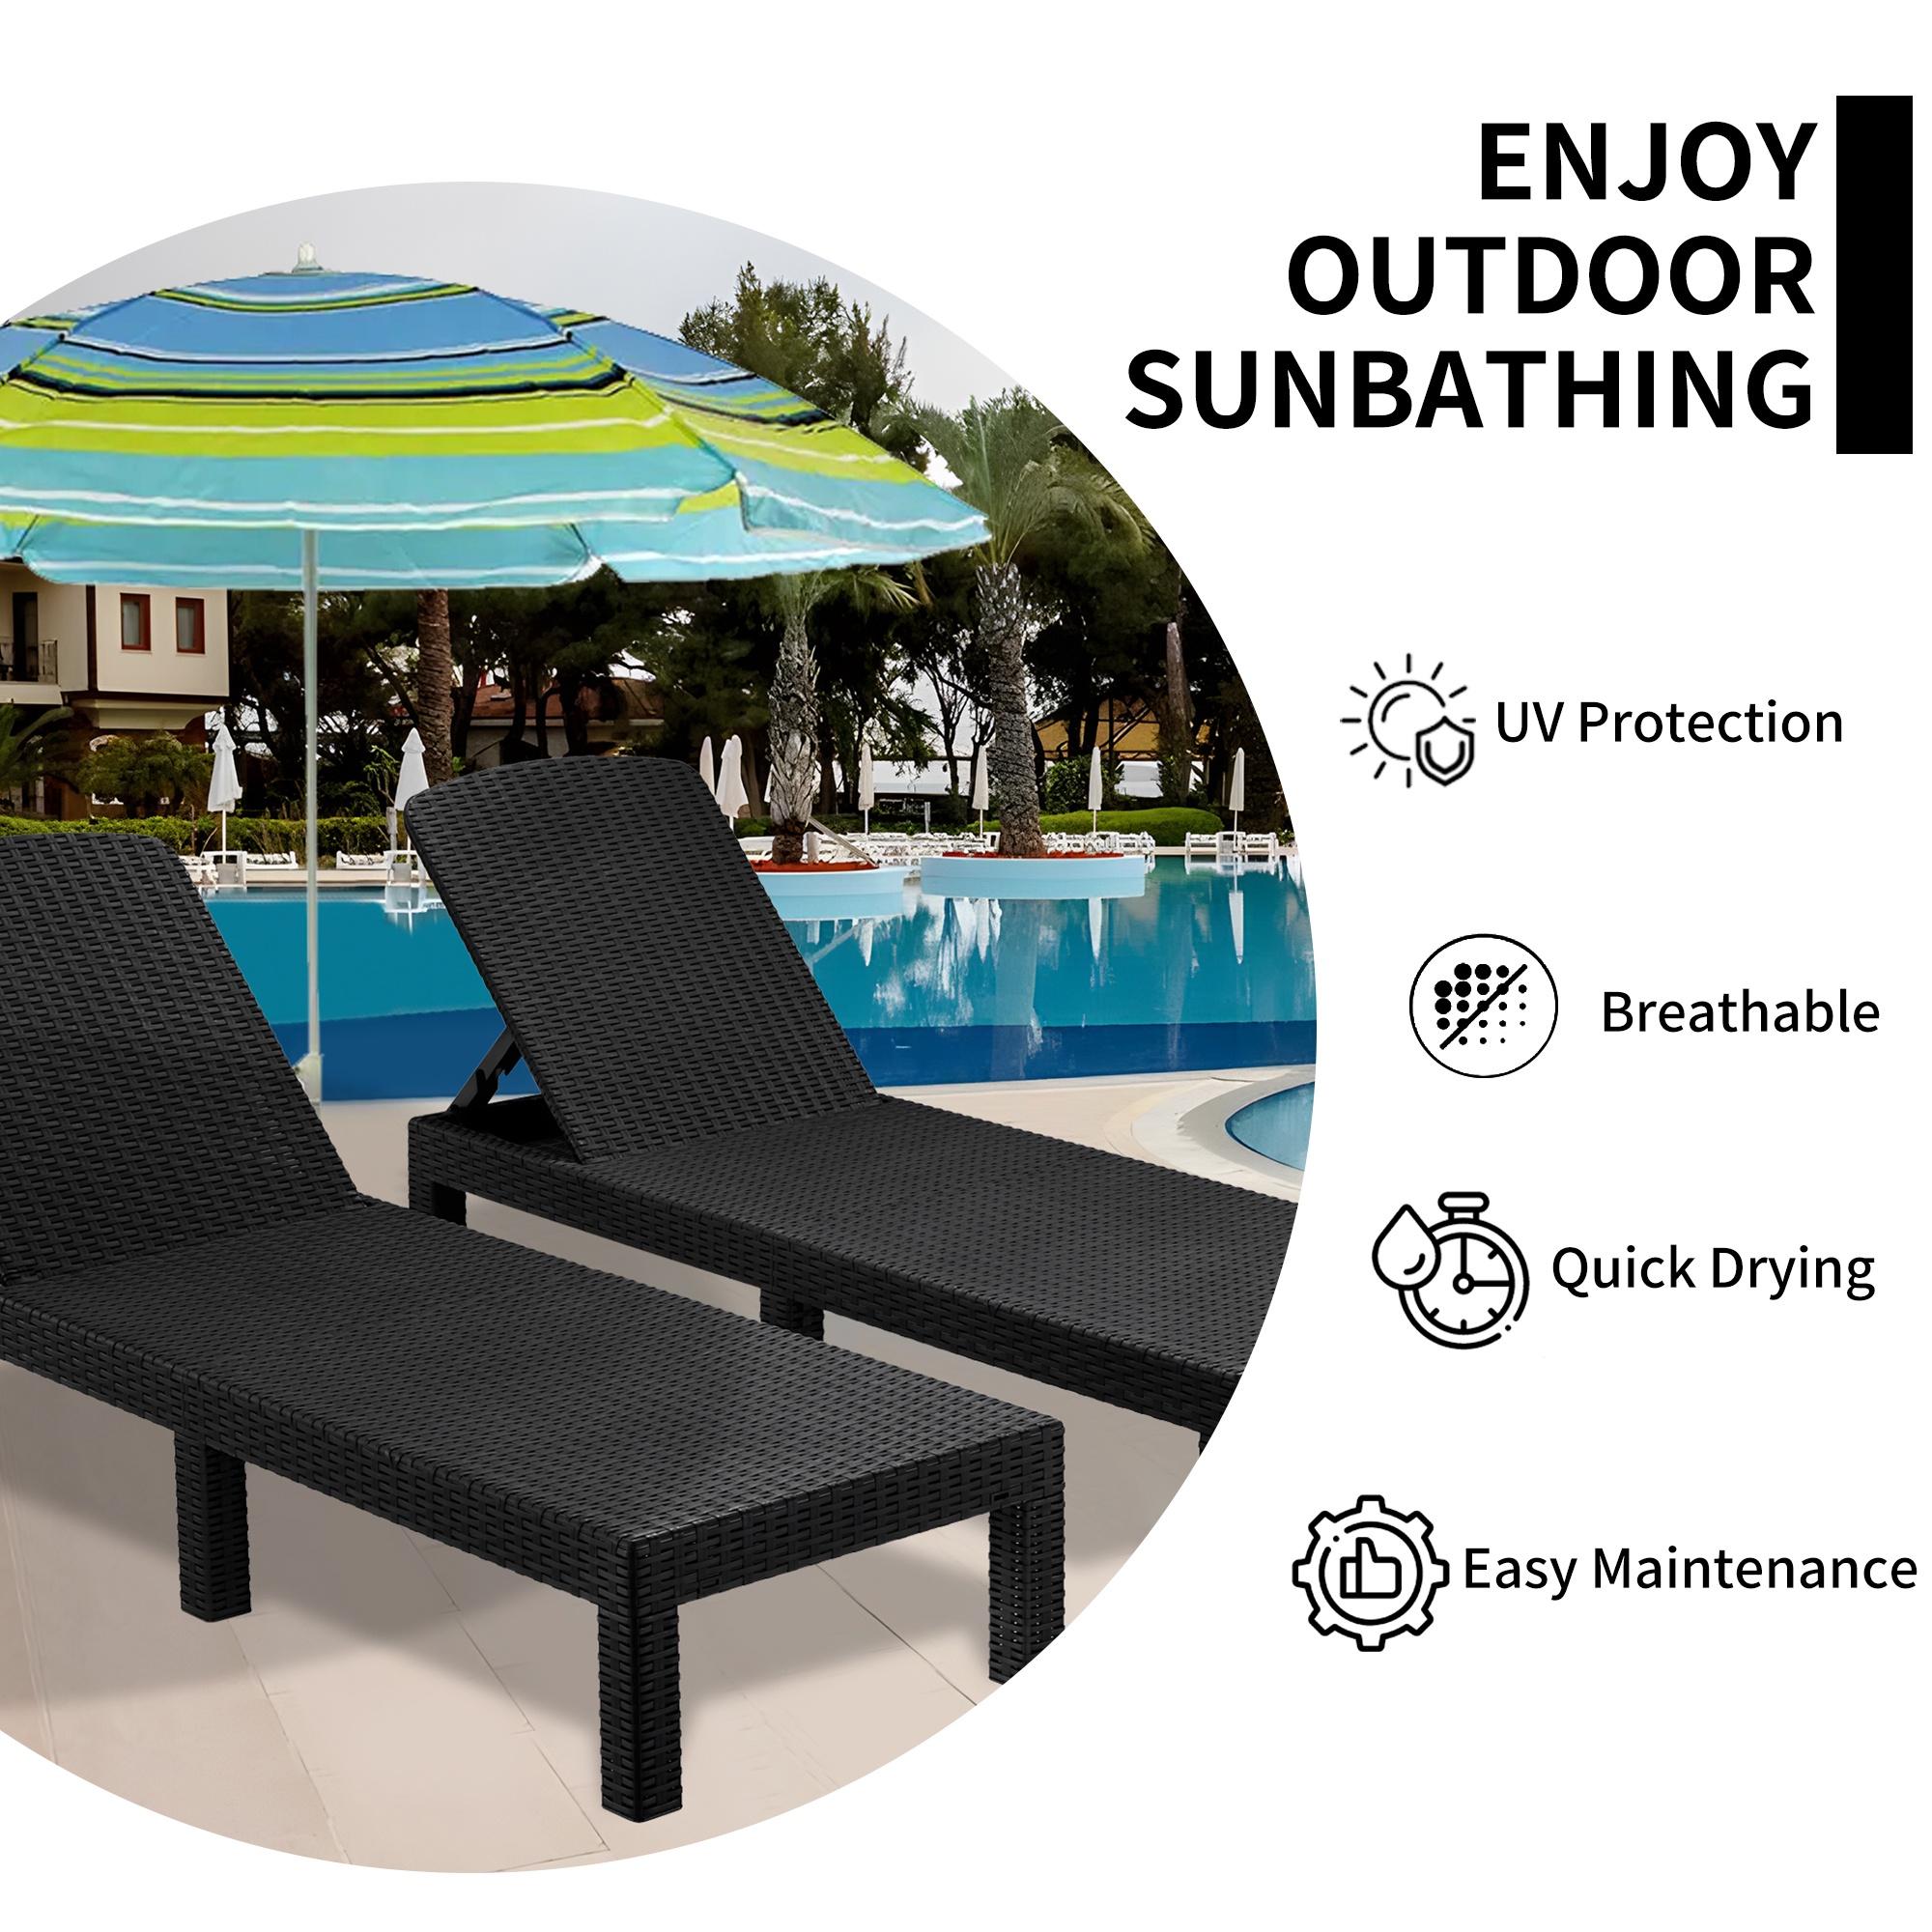 Patio Lounge Chairs Set of 2, Outdoor Chaise Lounge Chair with 4 Backrest Angles, Patio Foldable Reclining Chair Furniture for Poolside, Deck, Backyard, Black - image 5 of 9